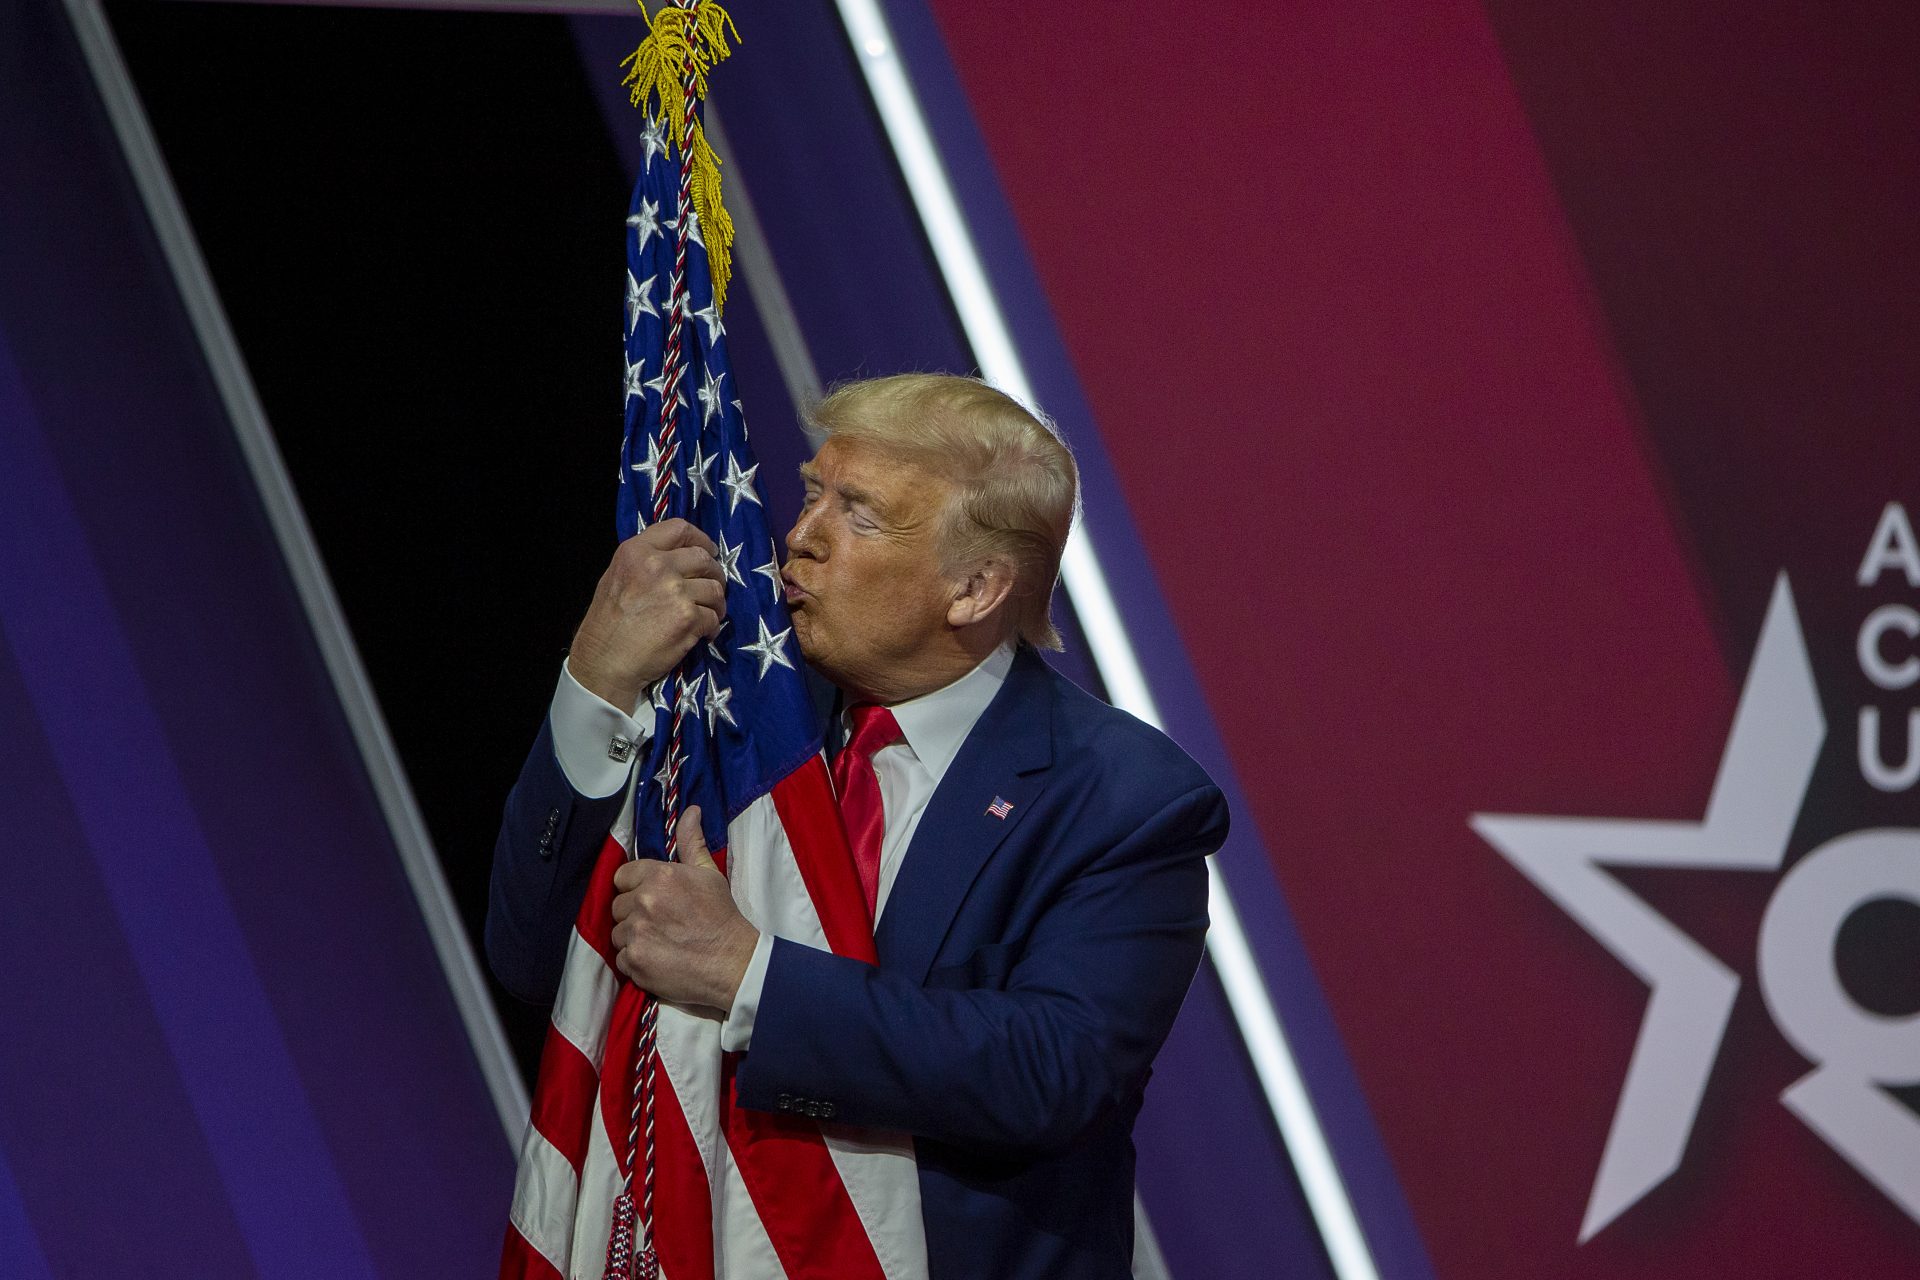 A tender moment with the American flag